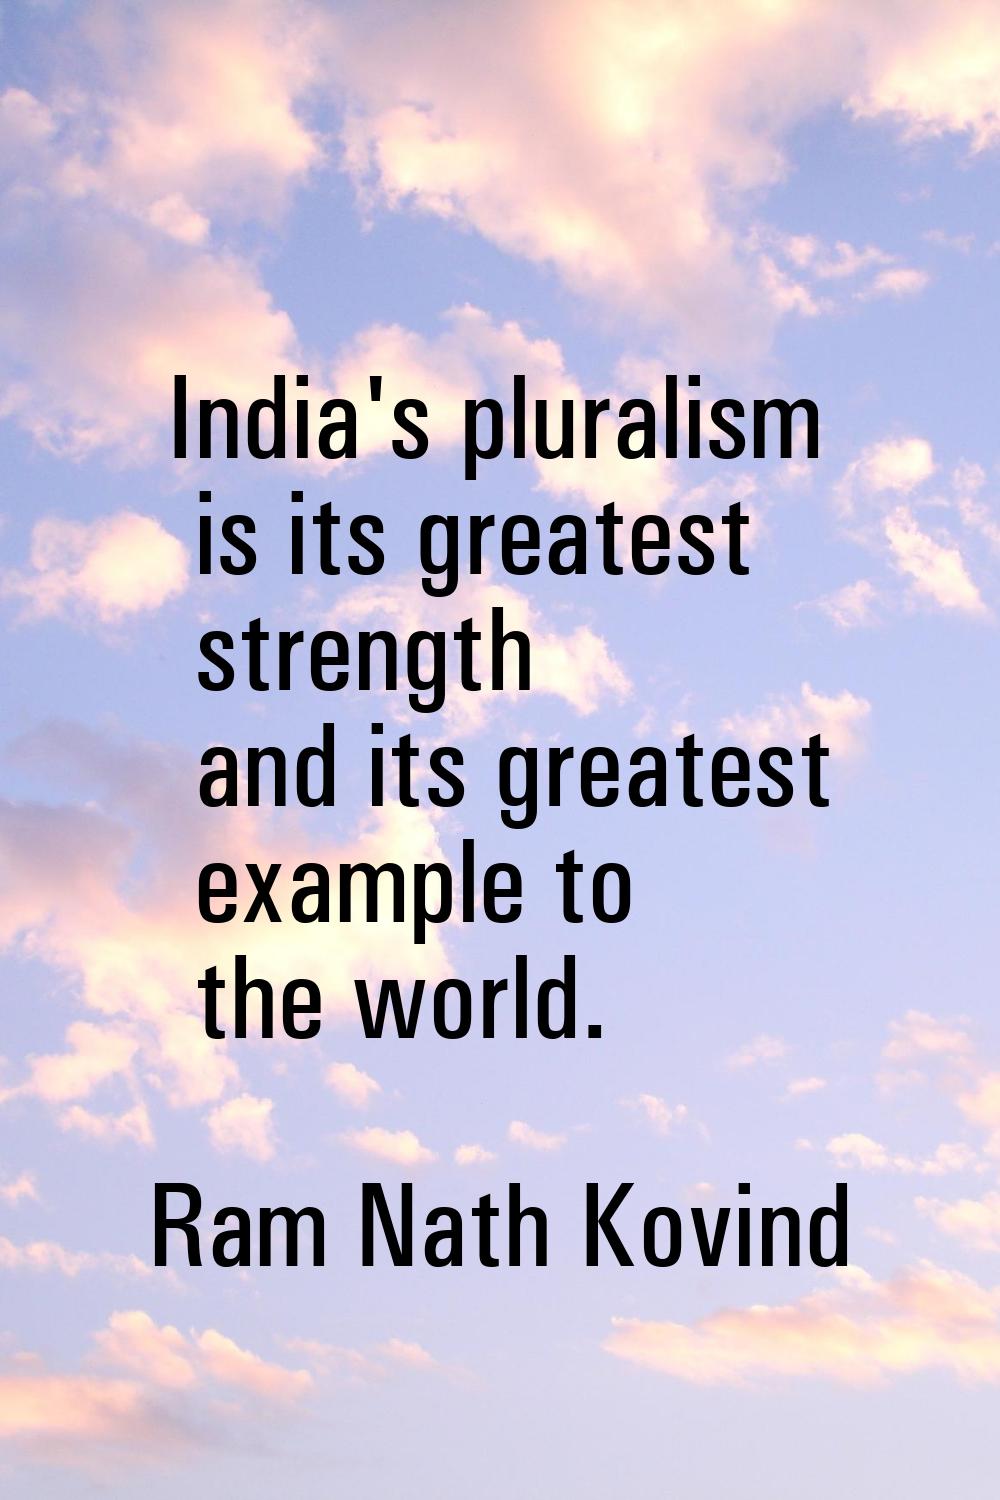 India's pluralism is its greatest strength and its greatest example to the world.